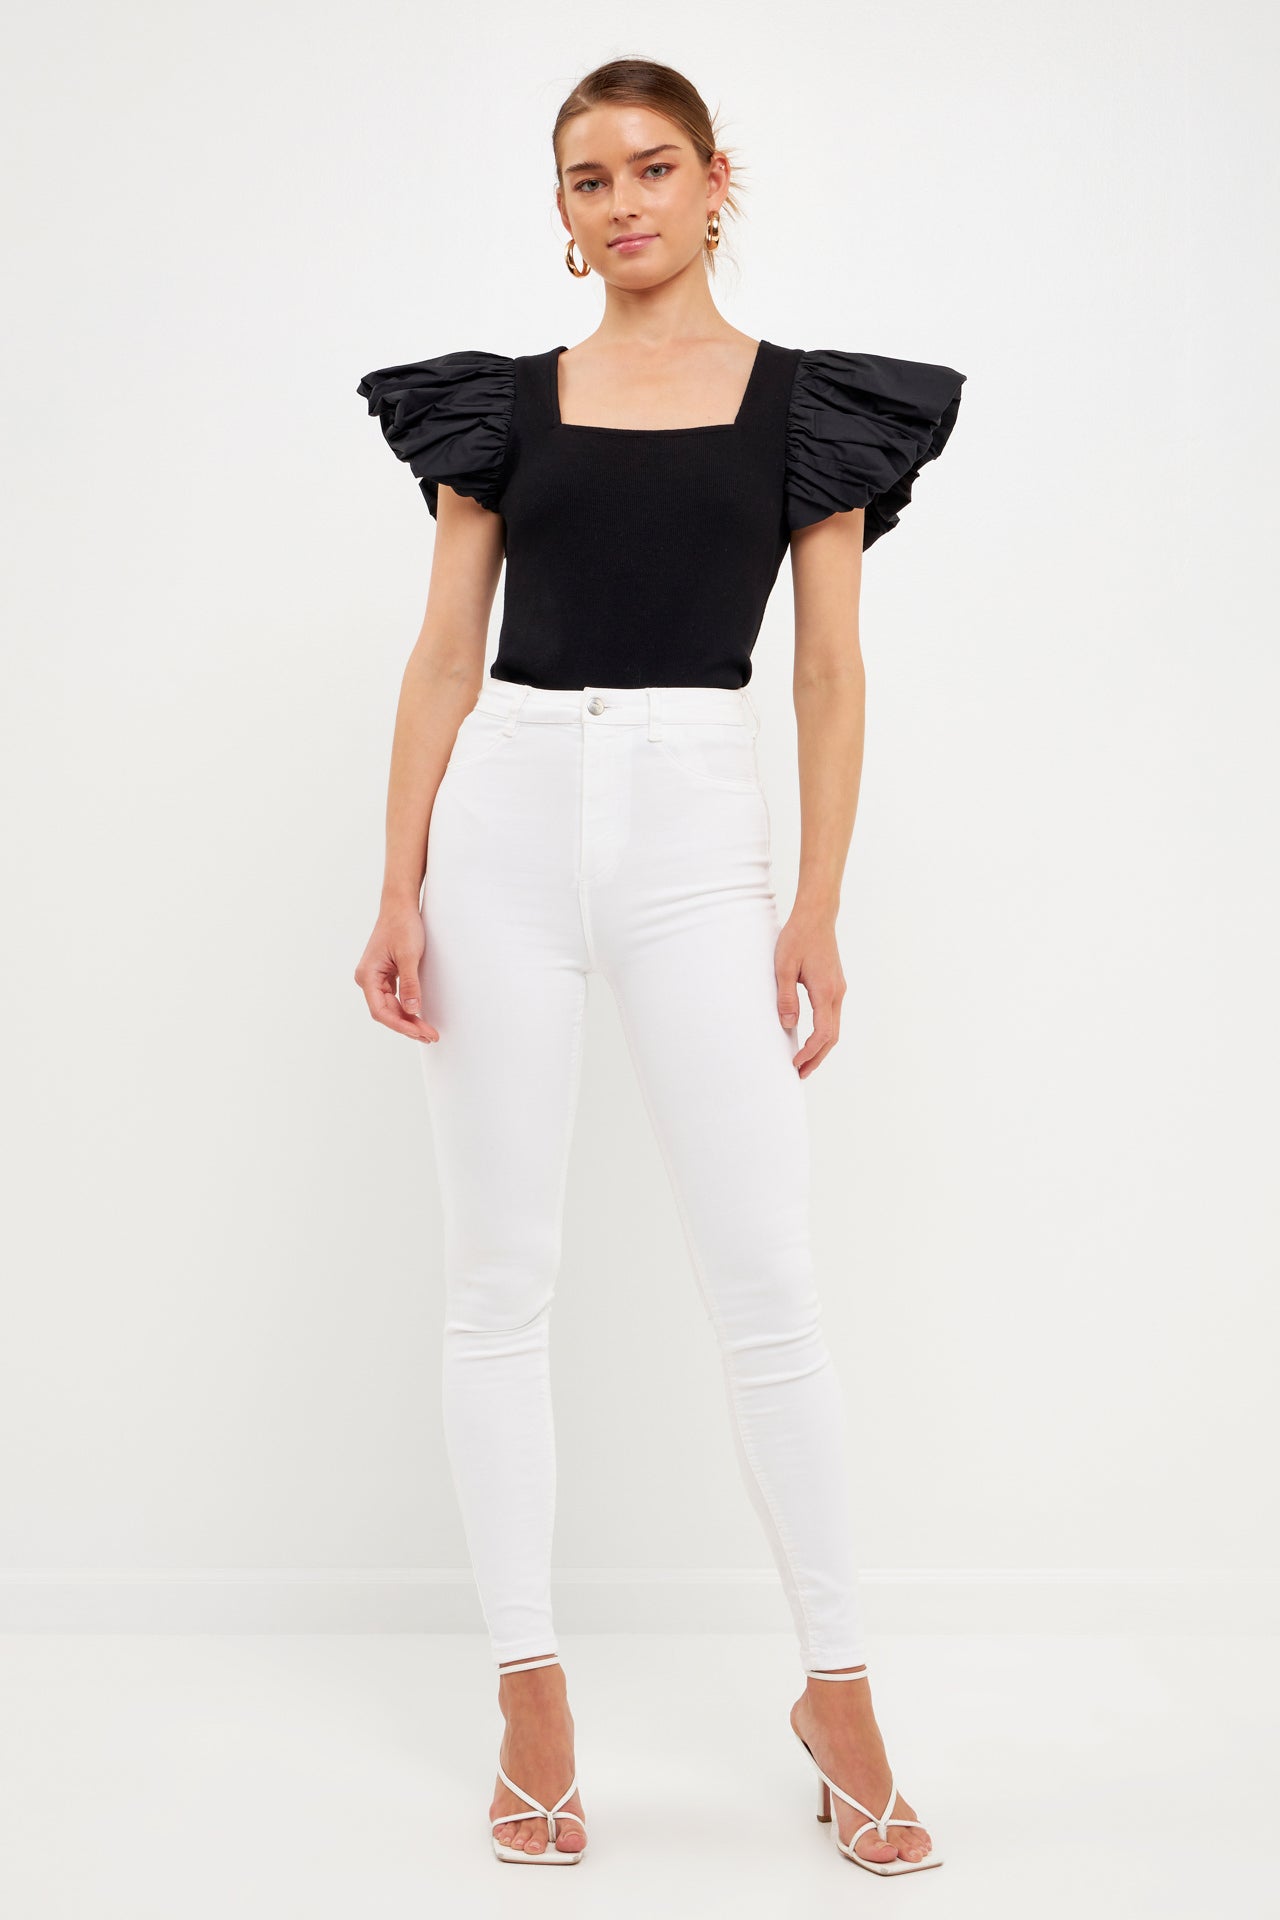 ENDLESS ROSE - Mixed Media Square Neckline Knit Top - TOPS available at Objectrare